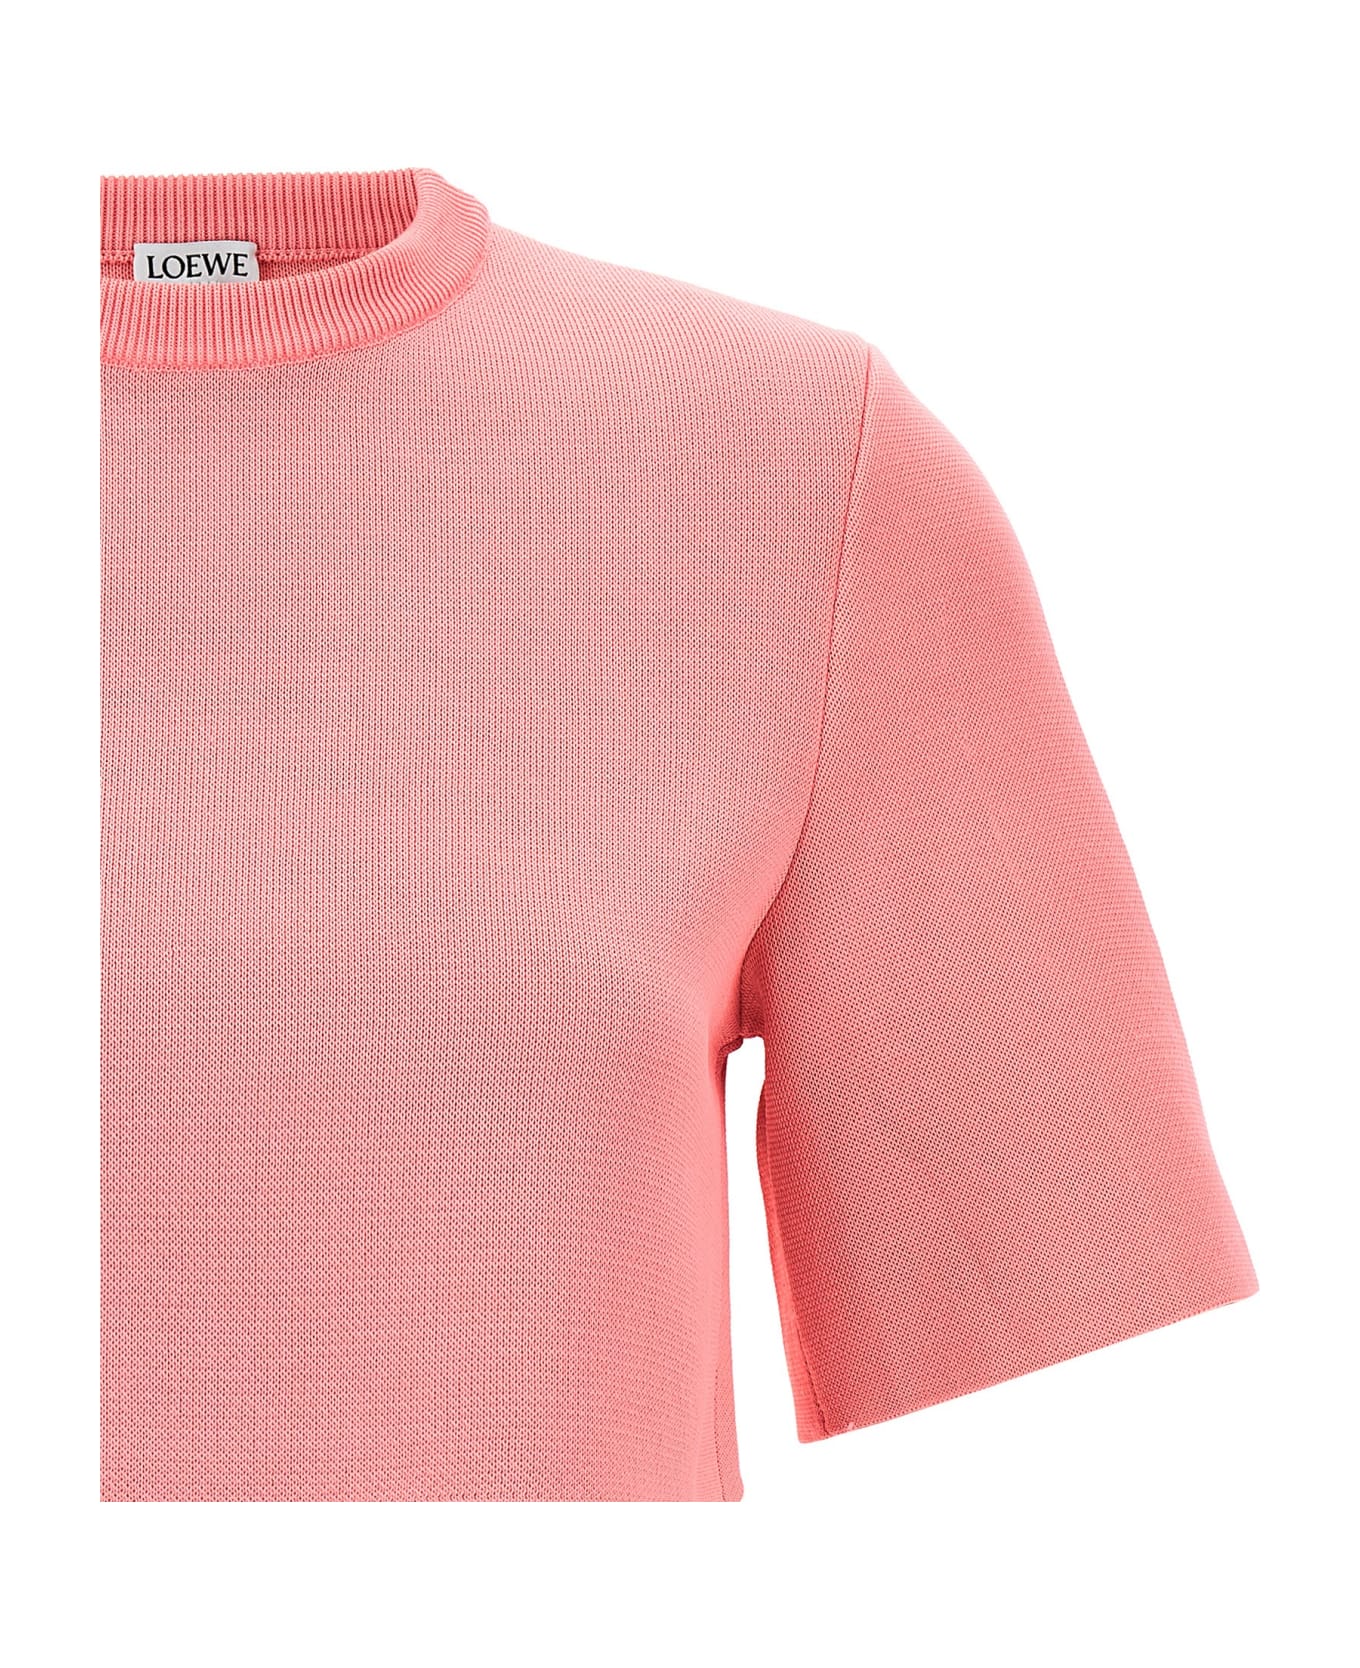 Loewe 'reproportioned' Cropped Top - Pink